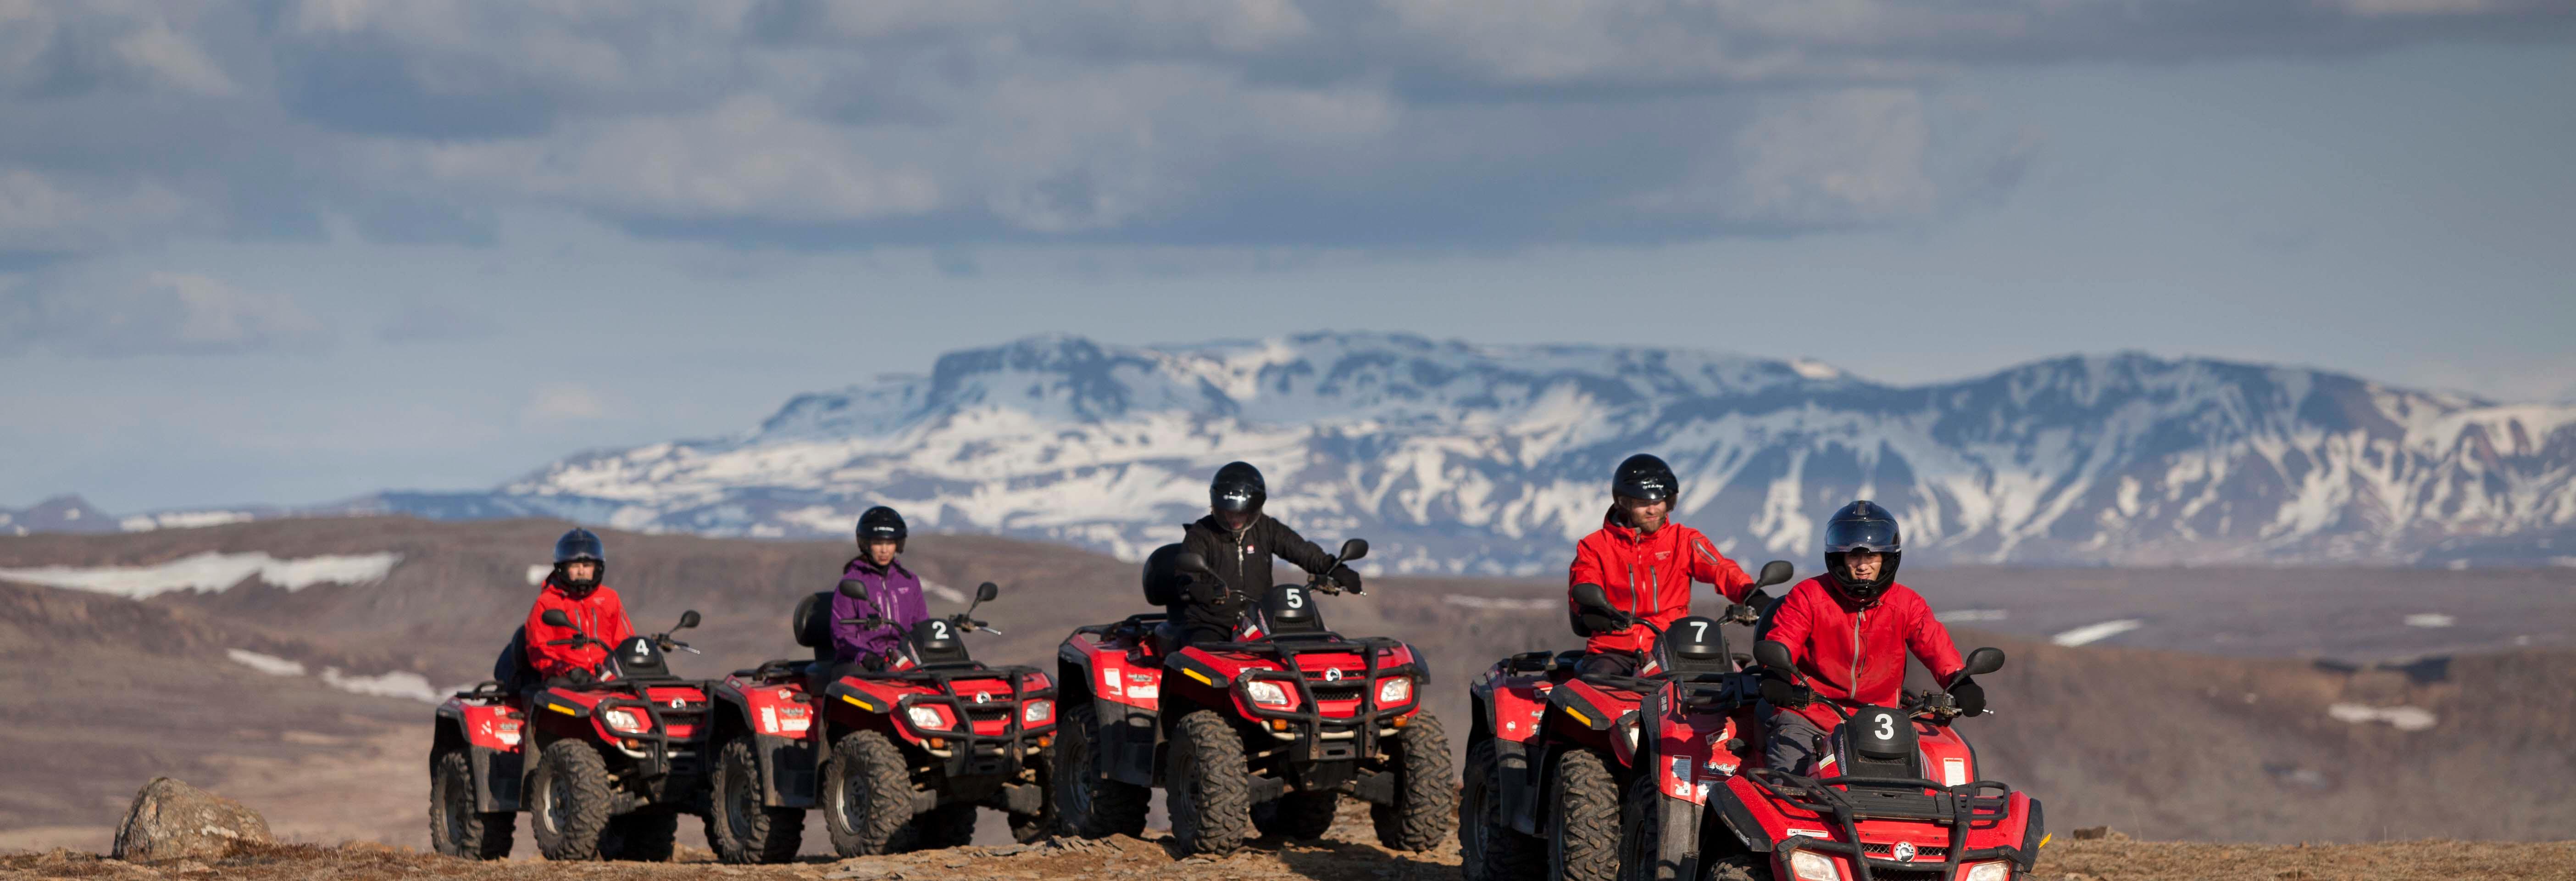 Quad bike safari in the mountains of Iceland - departure from your hotel in Reykjavik